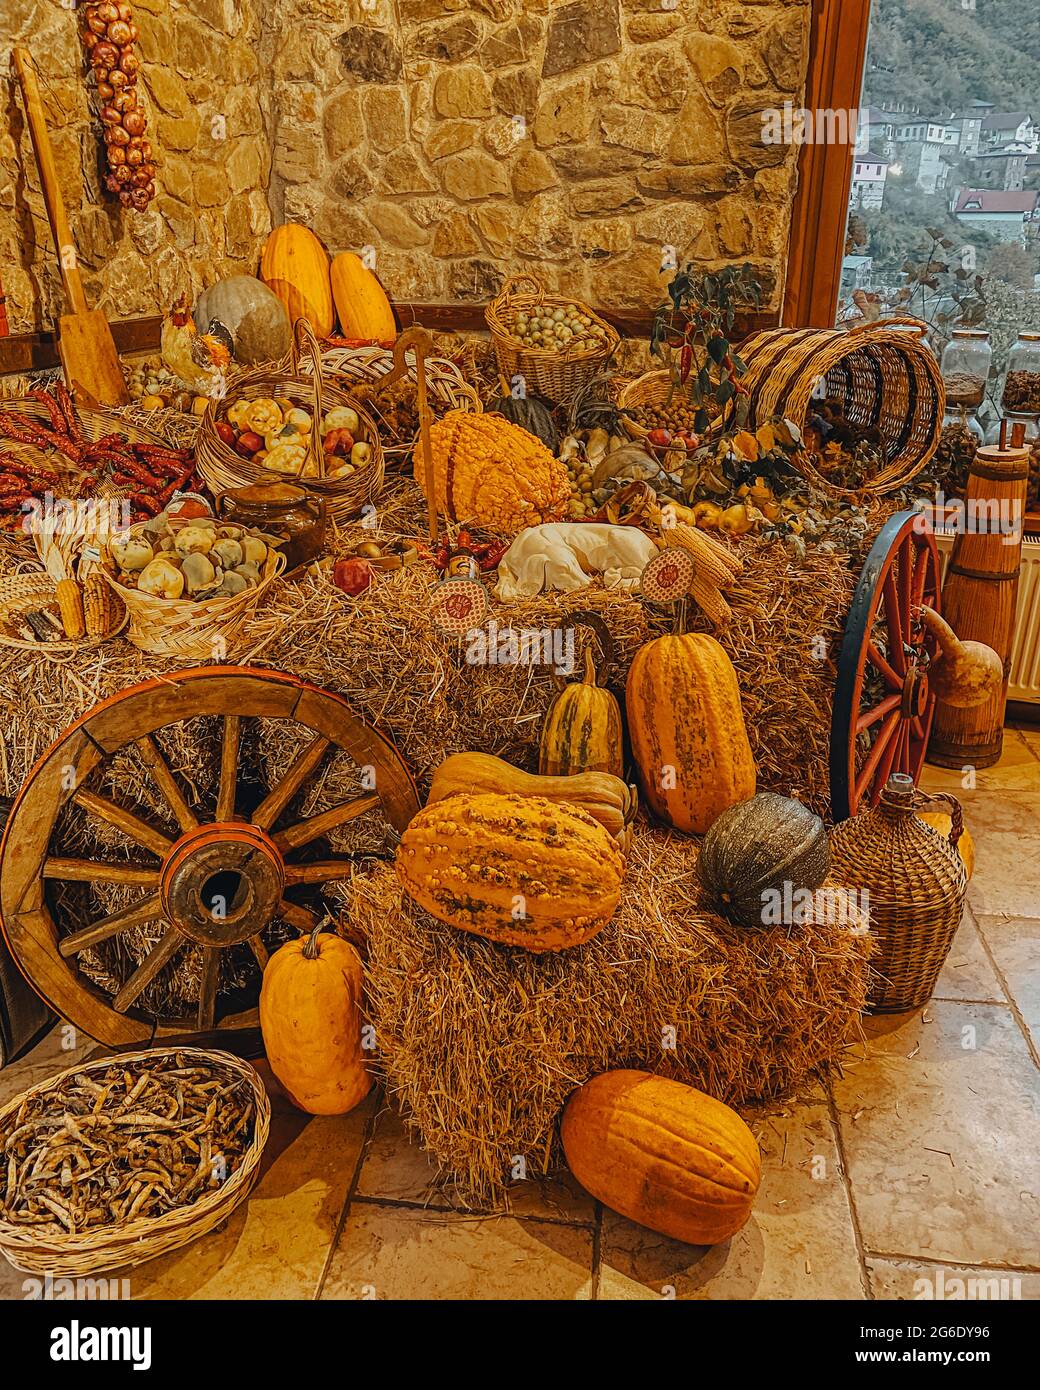 Pumpkins, corn, peas, onions, apples, pears, bell peppers, a basket full of fruit in the hay with a wheelchair wheel on a stone wall Stock Photo